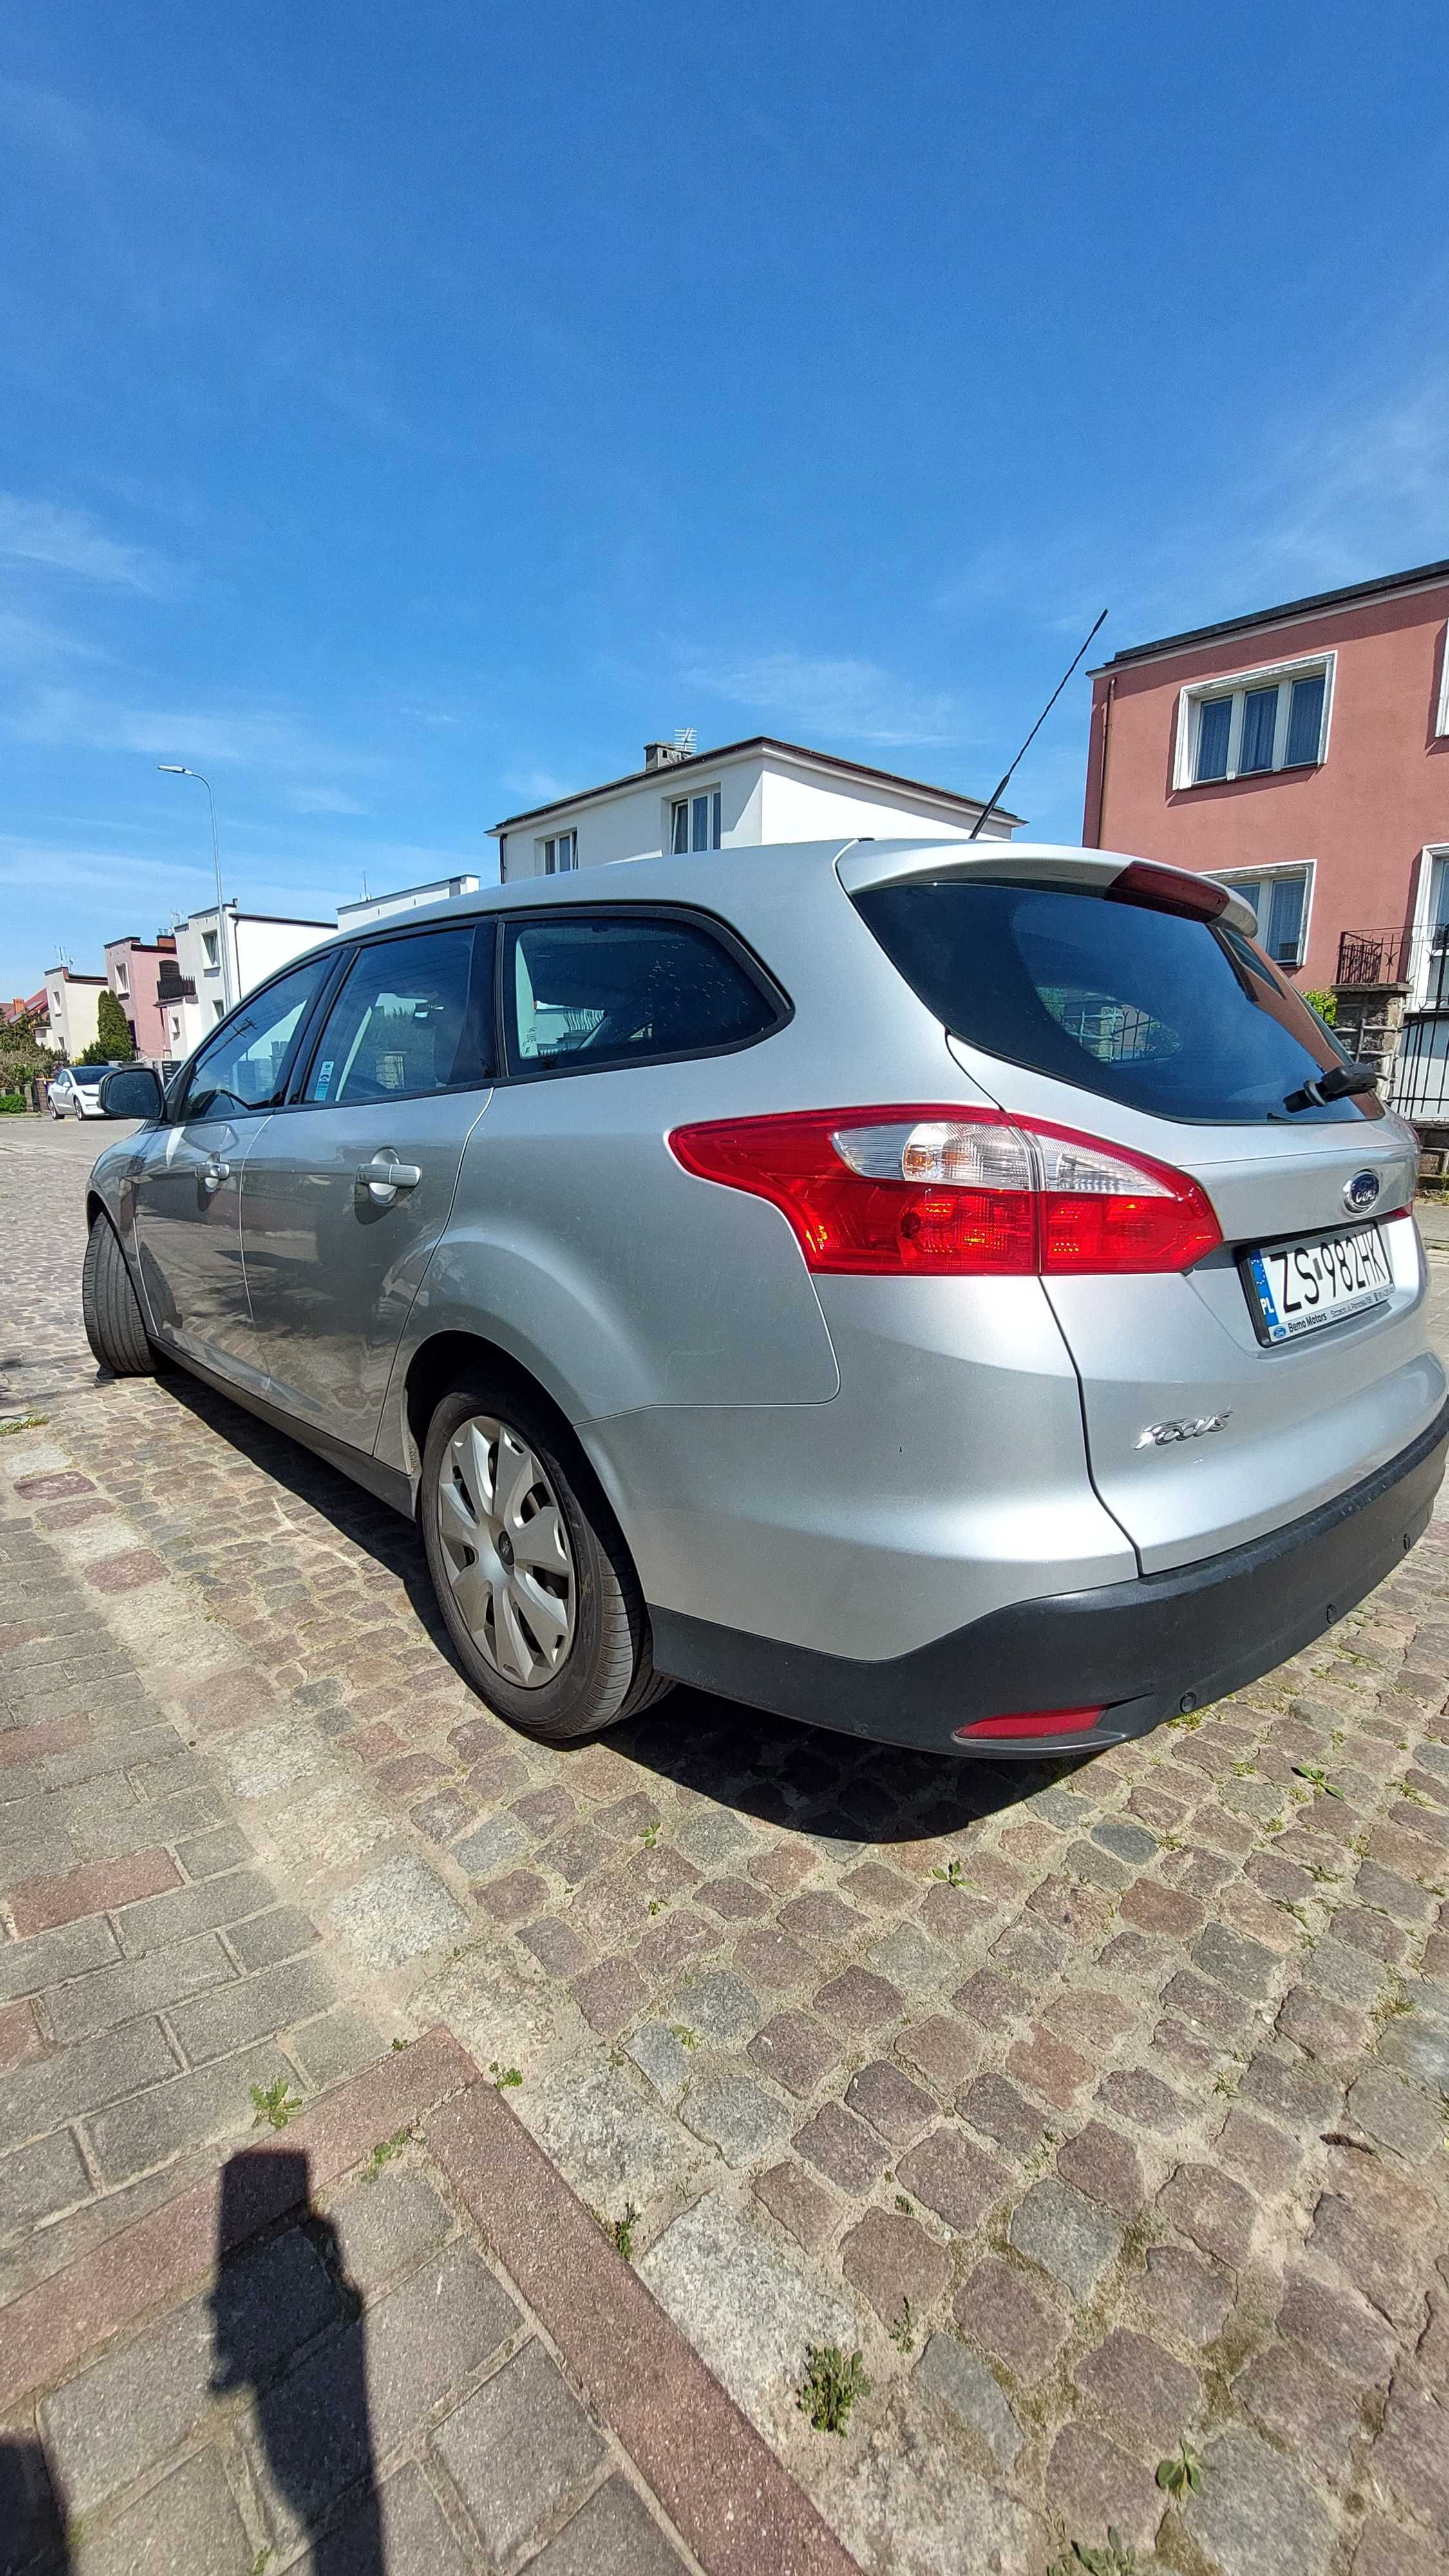 Ford Focus 1.6 TDCi + komplet opon zimowych